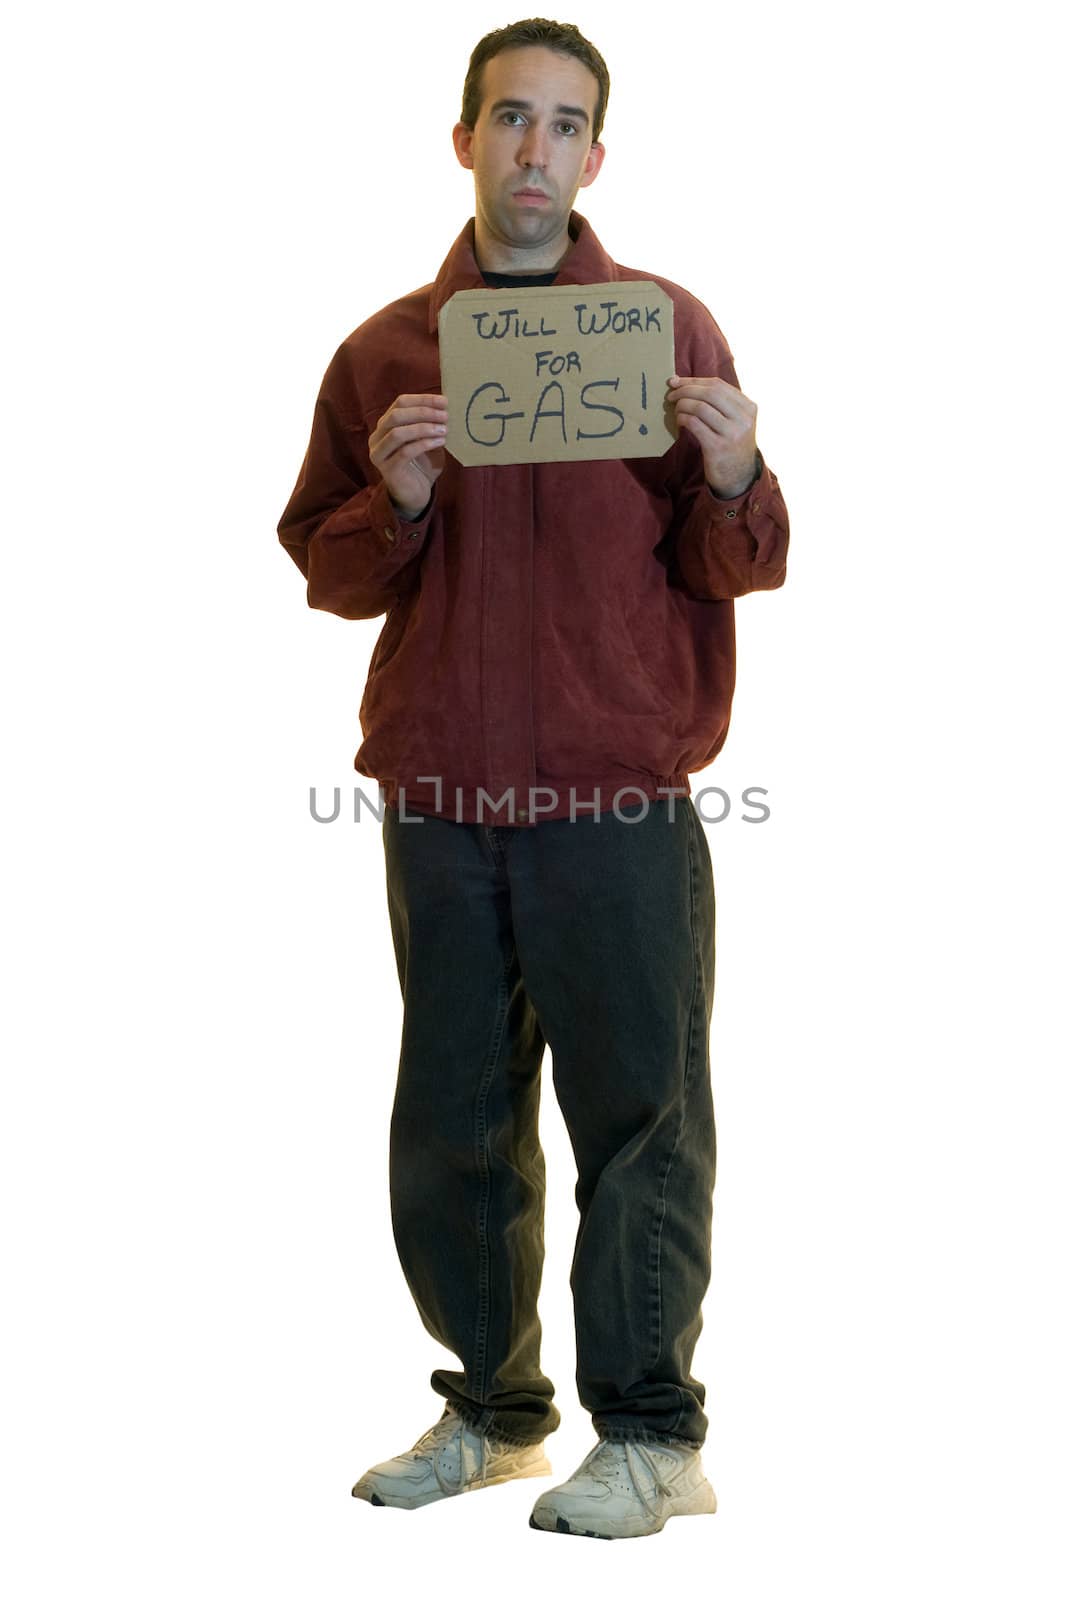 A jobless man holding a sign saying he will work for gas, isolated on a white background